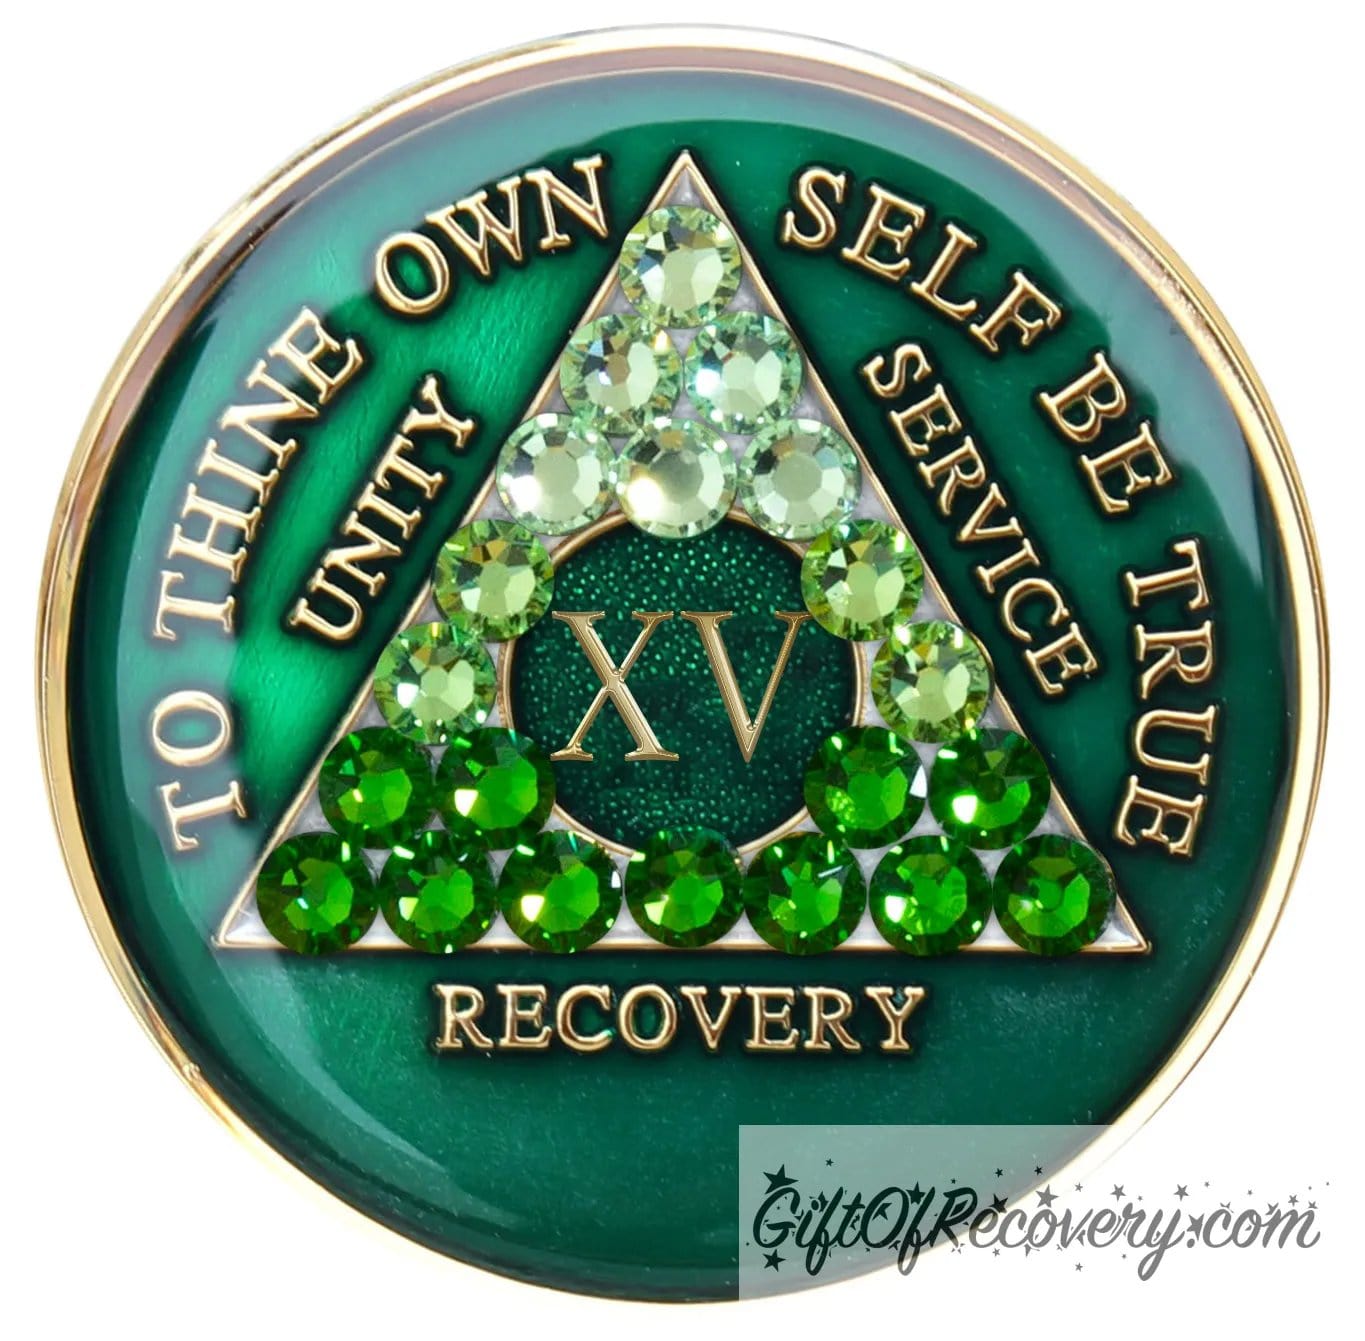 15 year AA medallion, emerald green with 21 genuine green crystals ranging from light to dark green in the shape of the triangle in the center to emphasize the transformation in the recovery journey, to thine own self be true, roman number, unity, service recovery are embossed in 14k gold-plated brass, the middle circle is sparkle green and the recovery medallion is sealed in resin for a shiny finish that lasts.